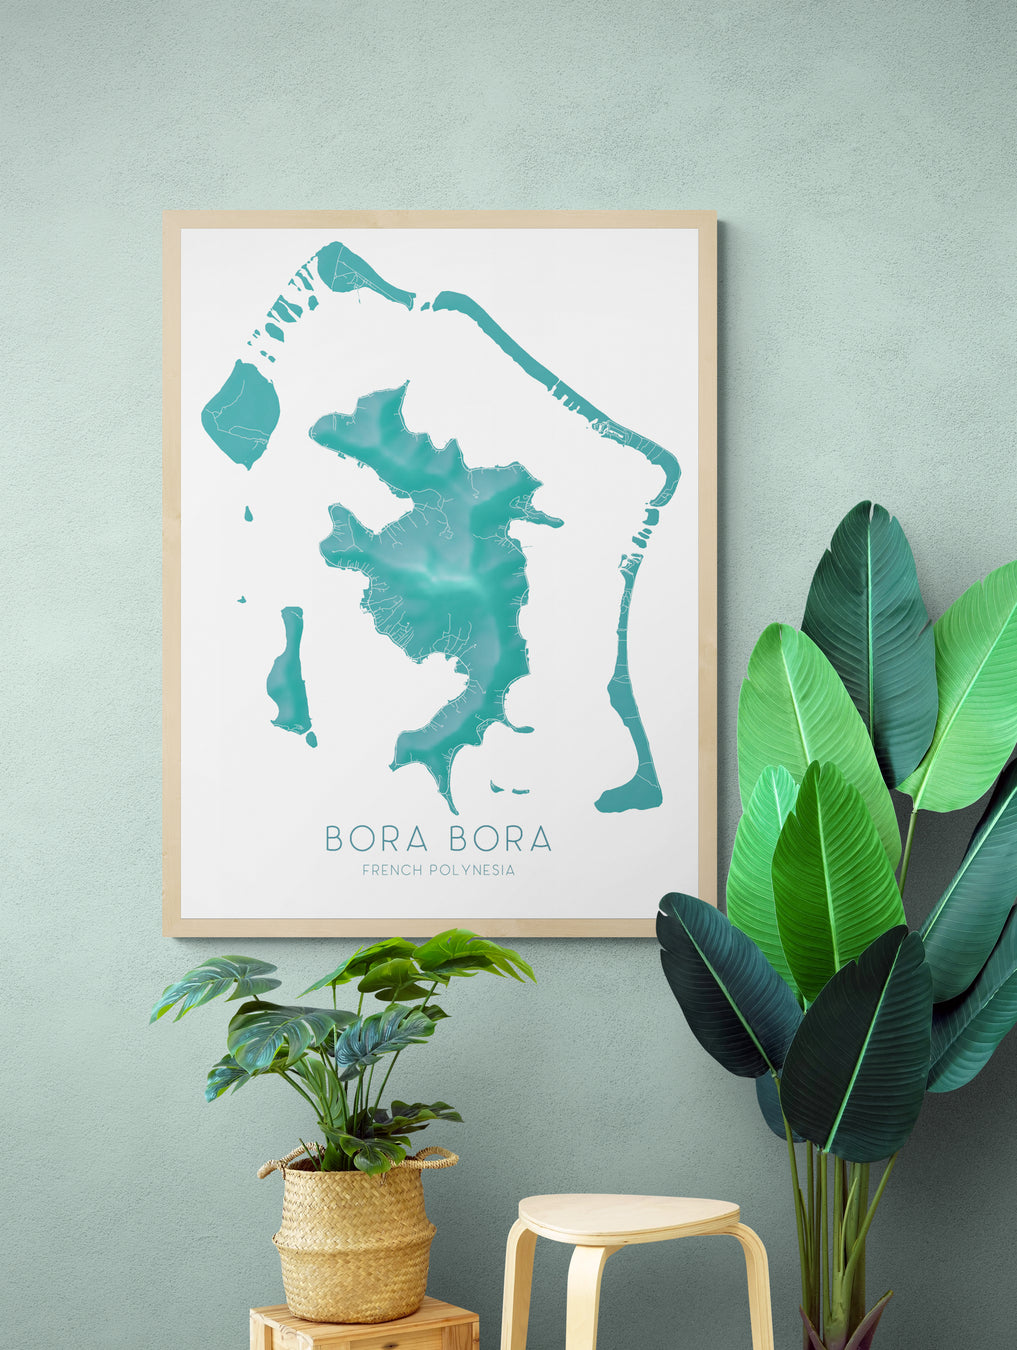 Bora Bora map print with a 3D topographic turquoise design by Maps As Art.